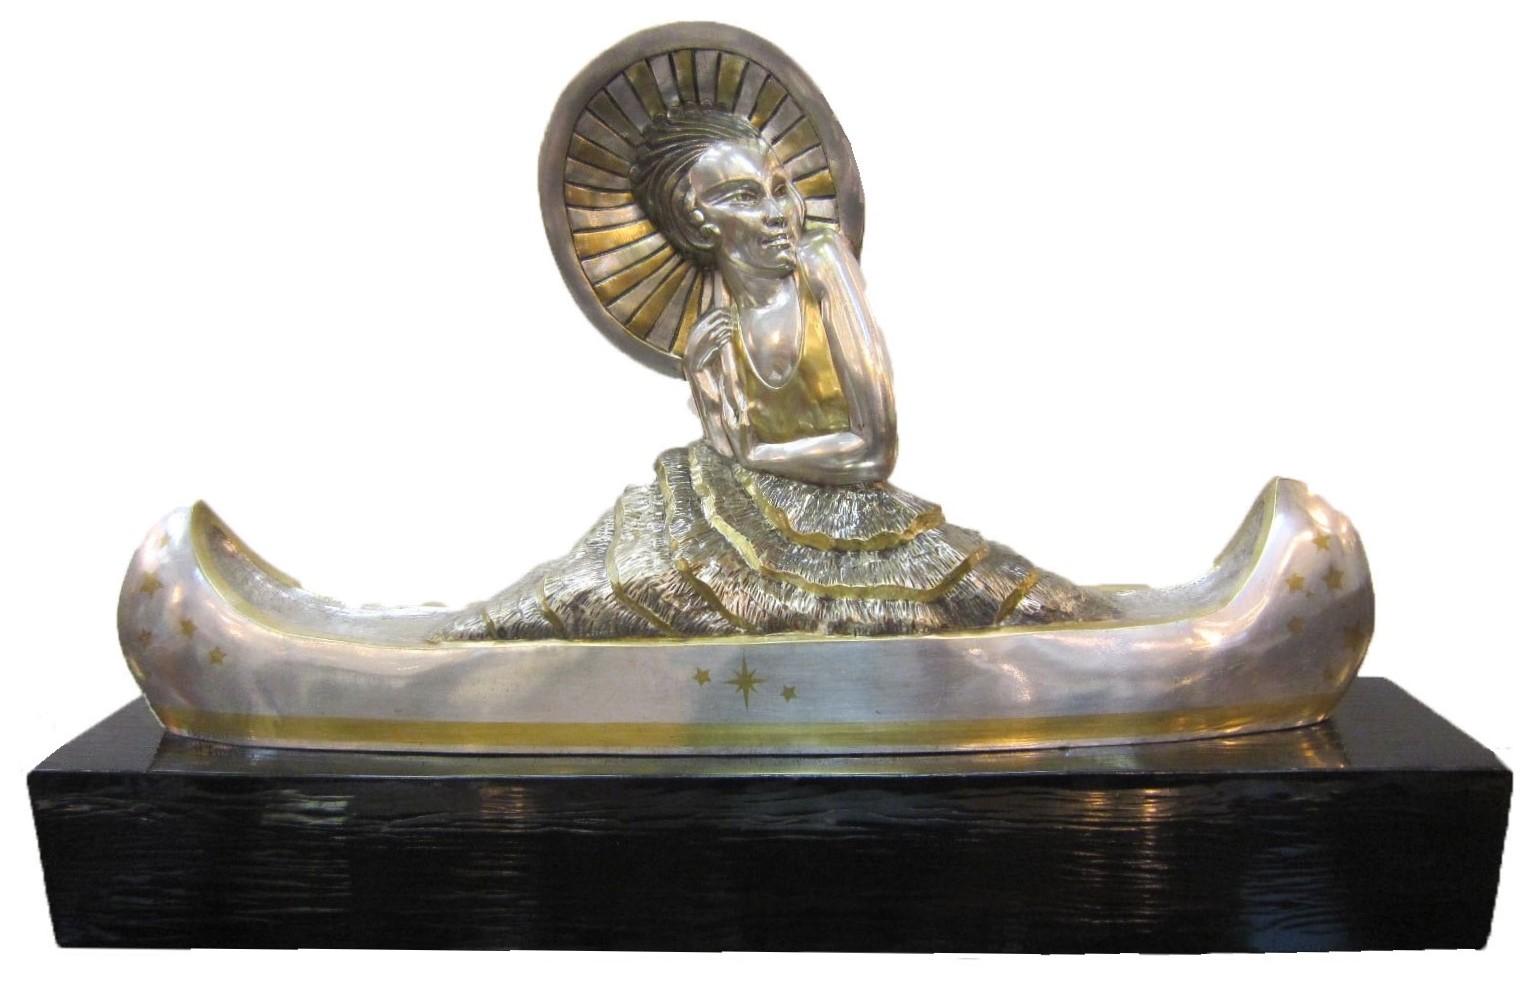 Marie-Louise Simard (French, 1886-1963)
A large and important original French Art Deco silver and parcel gilt bronze sculpture of a female figure holding a parasol in a canoe.
The figure wears a gilt bodice and a two-tone ruffled skirt, details